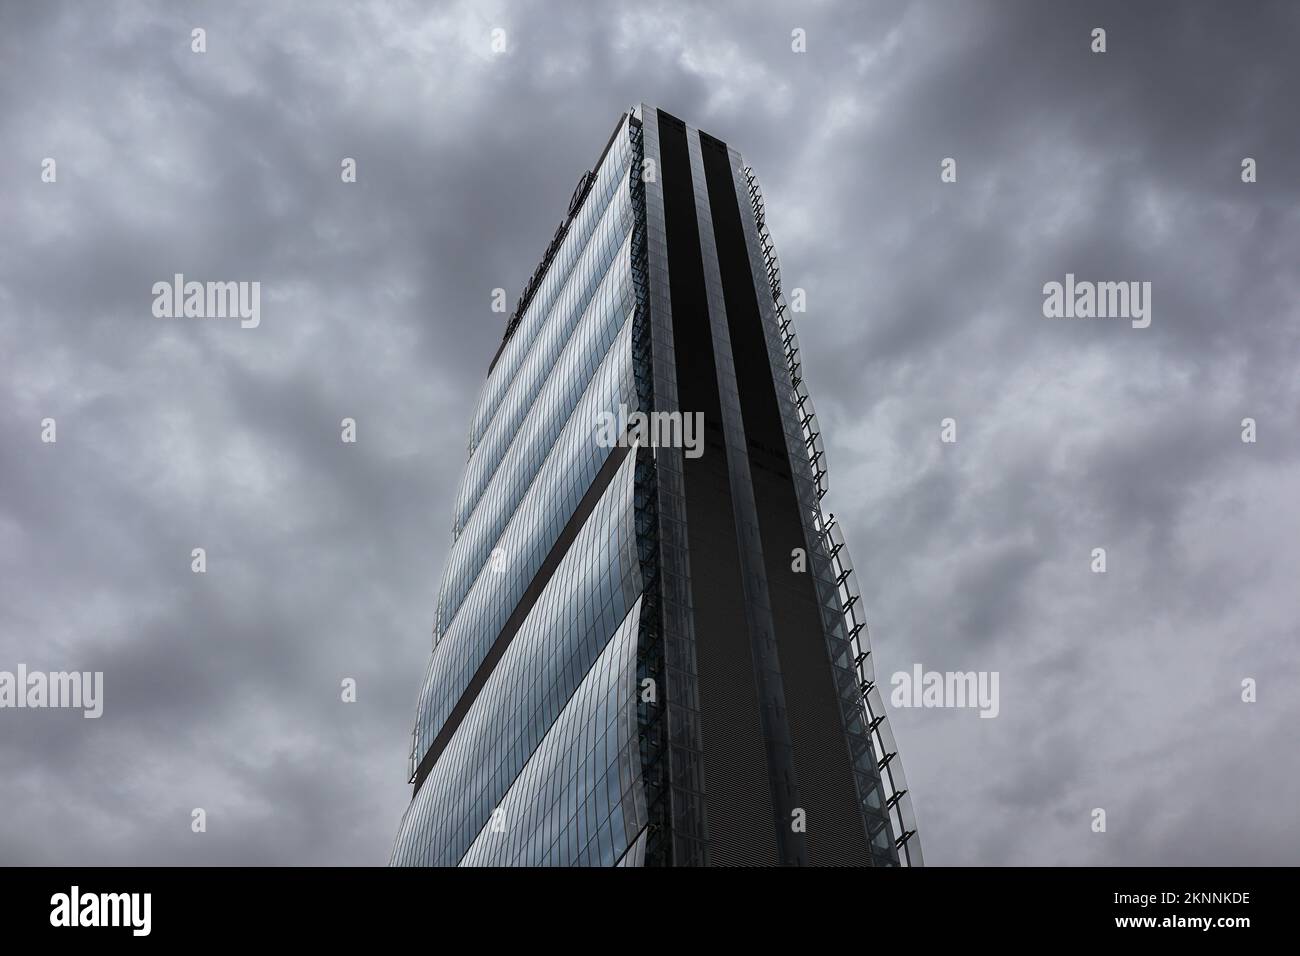 Milan, Italy - June 26, 2022: Bottom View of Allianz Tower in Tre Torri. Look Up at CityLife Financial Architectural Building with Cloudy Sky. Stock Photo